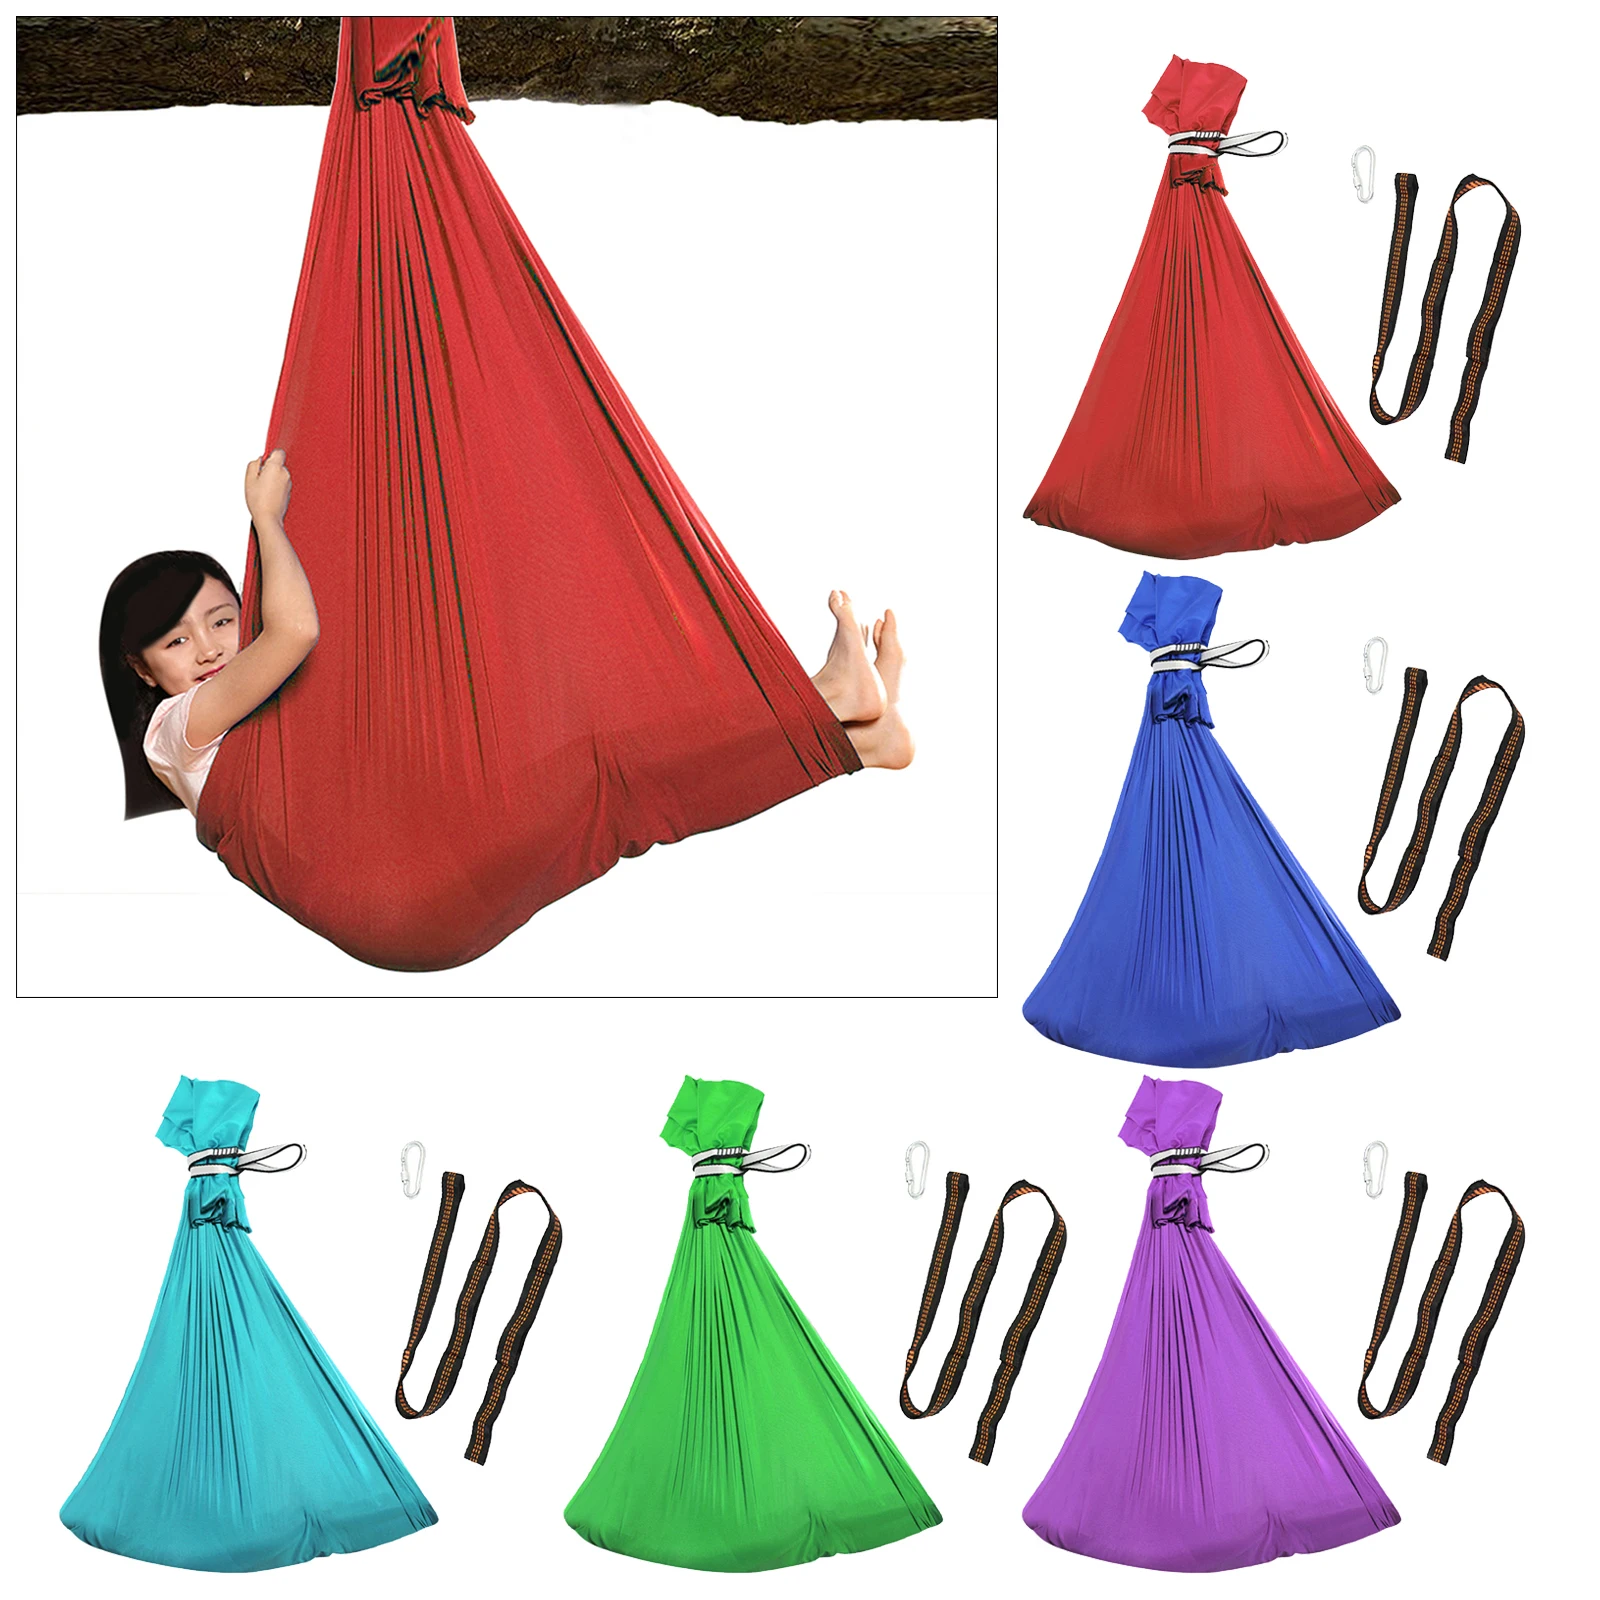 Solid Kids Swing Hammock indoor Outdoor Comfortable Sensory Swing Carabiner Daisy Chain for Living Room Travlling Camping Hiking